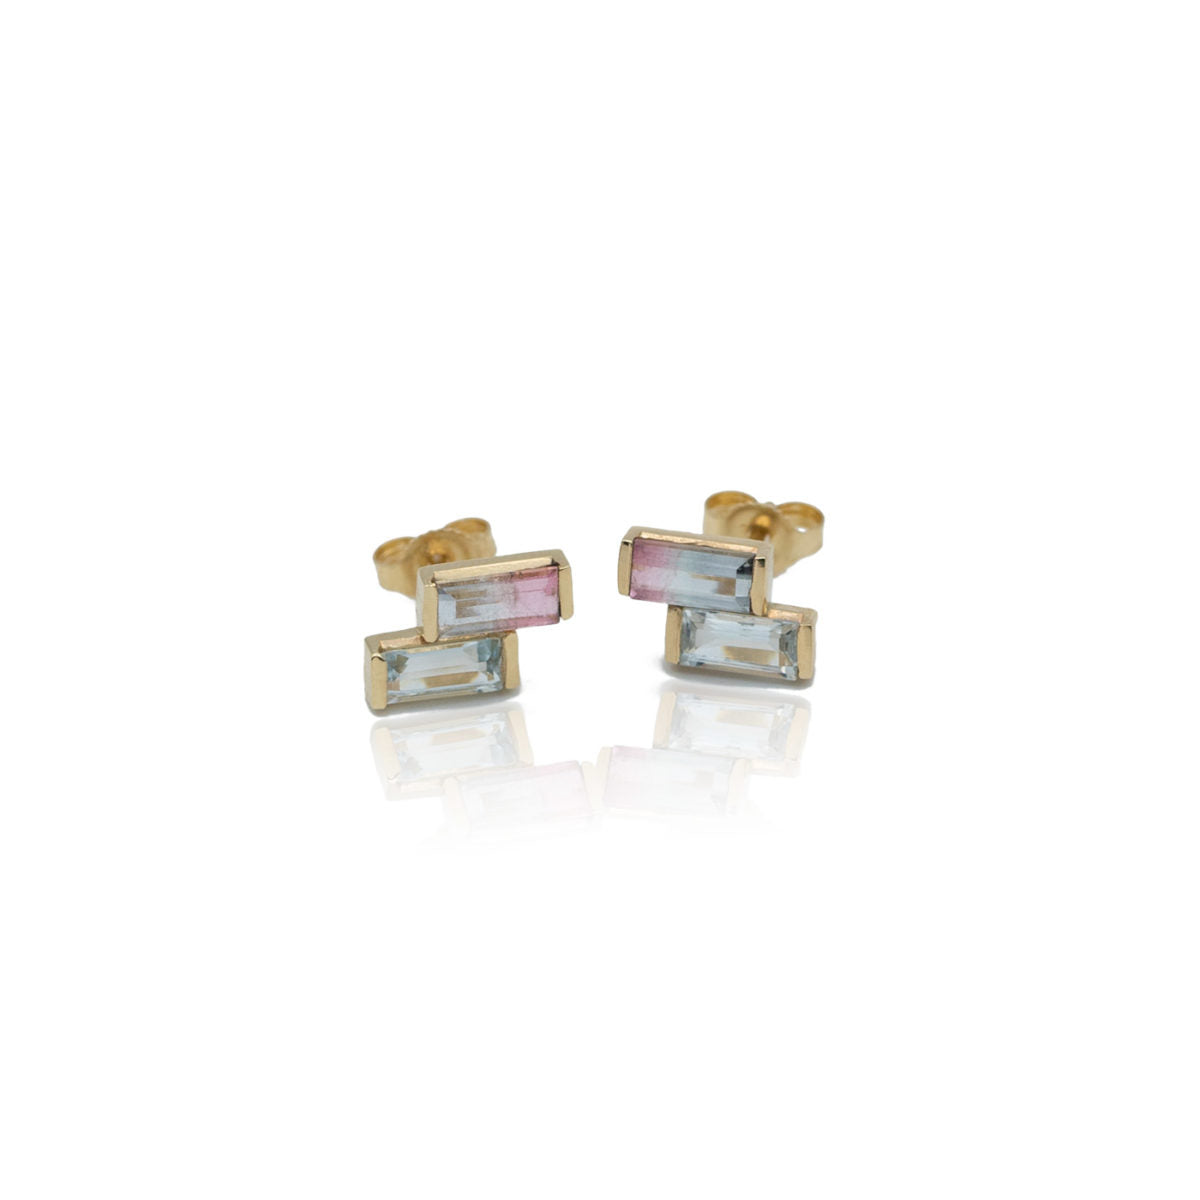 aquamarine and bicolor tourmaline solid gold earrings